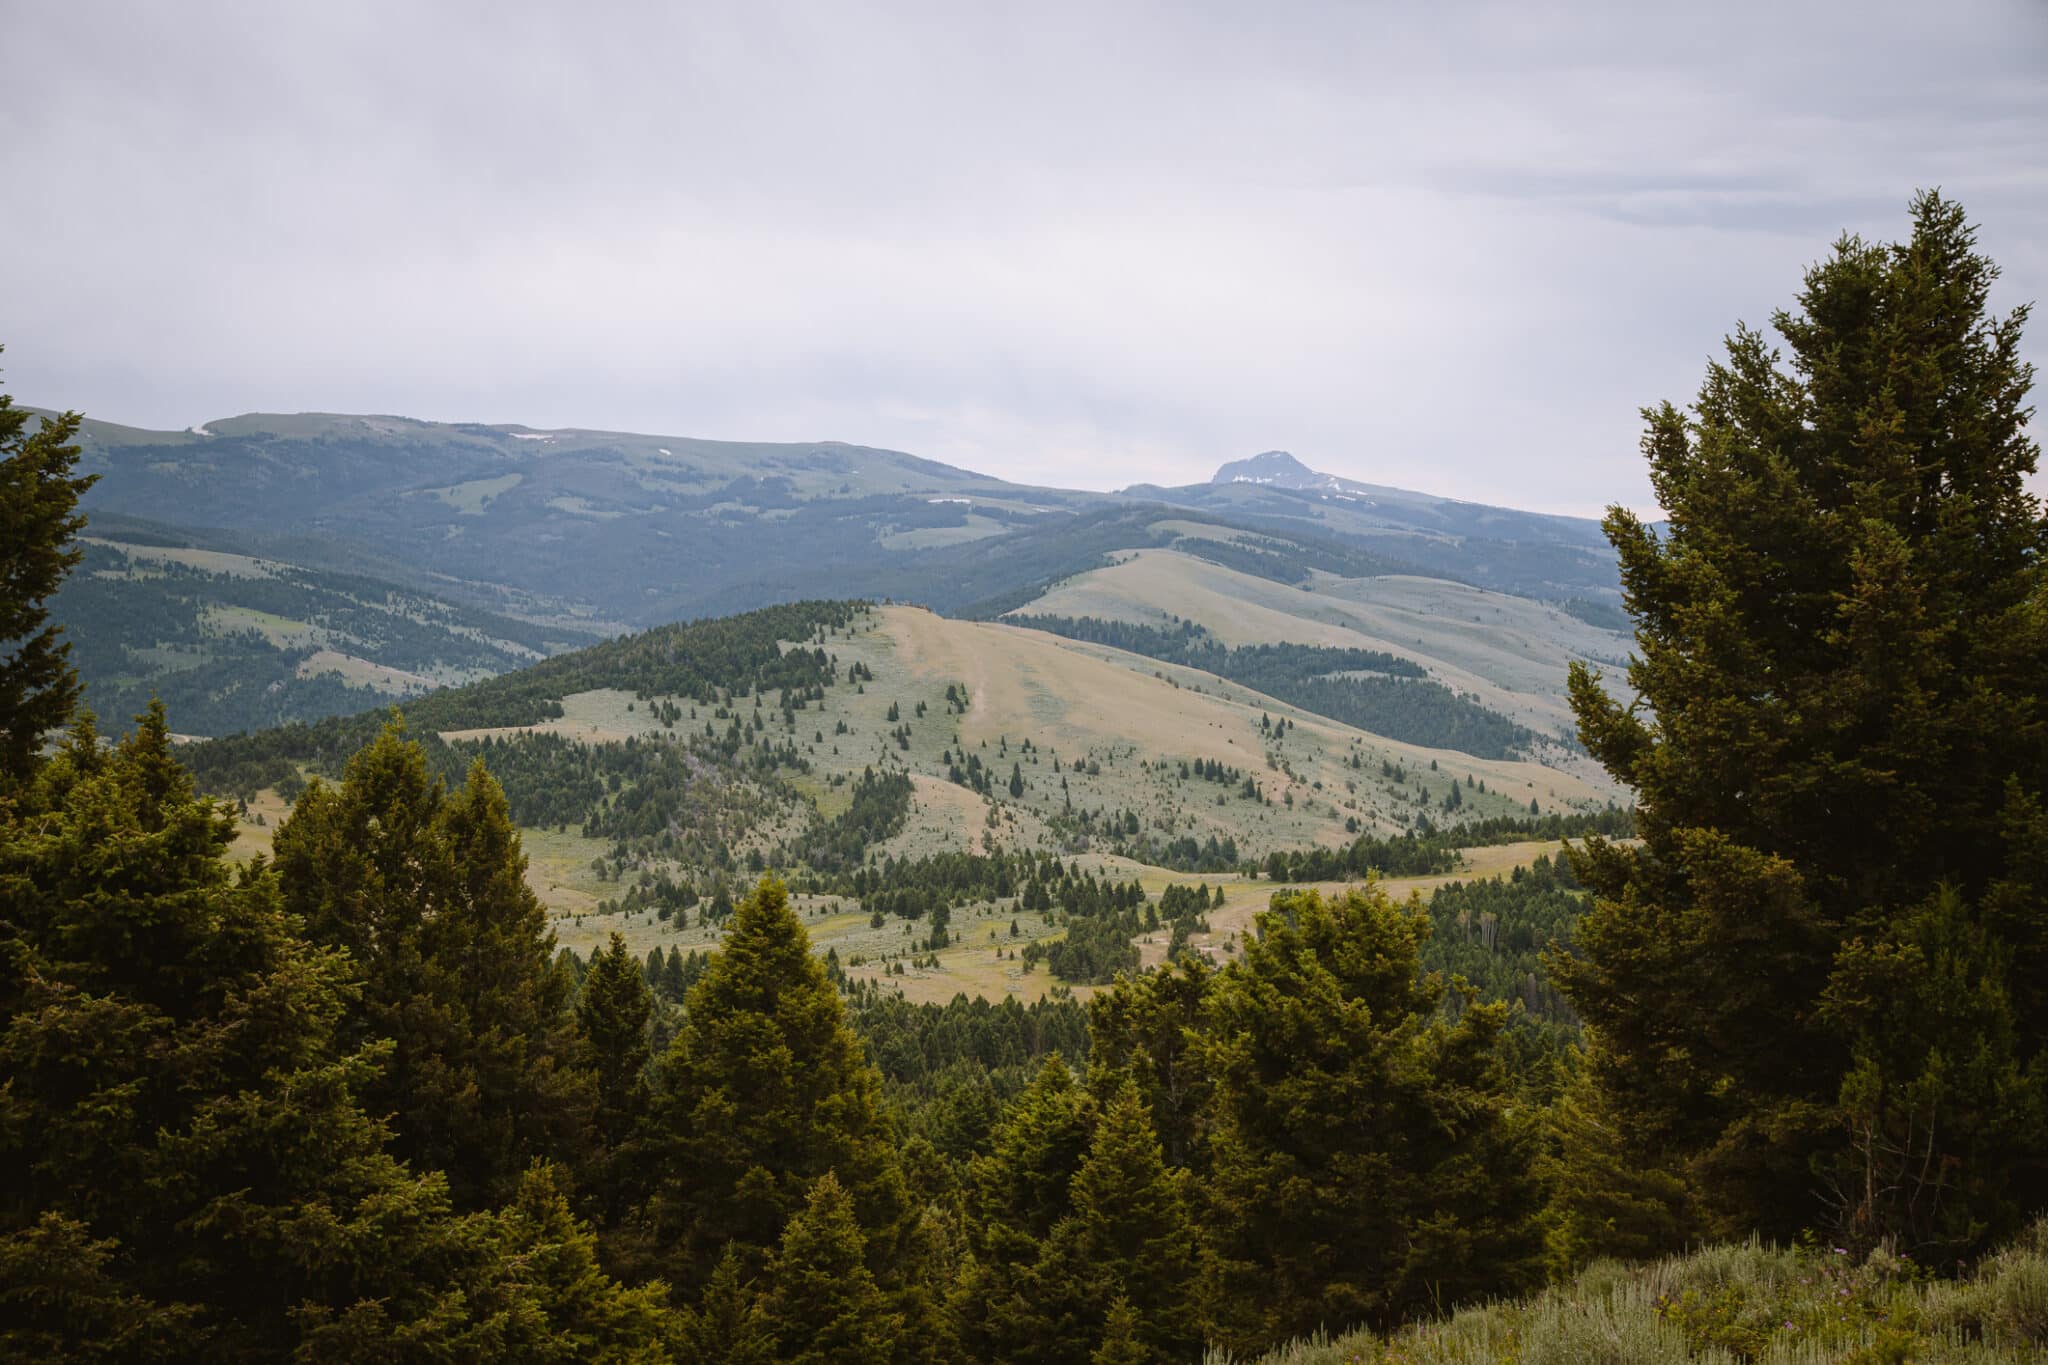 Explore Montana's natural beauty at Upper Canyon Outfitters where you will see expansive views like this one.